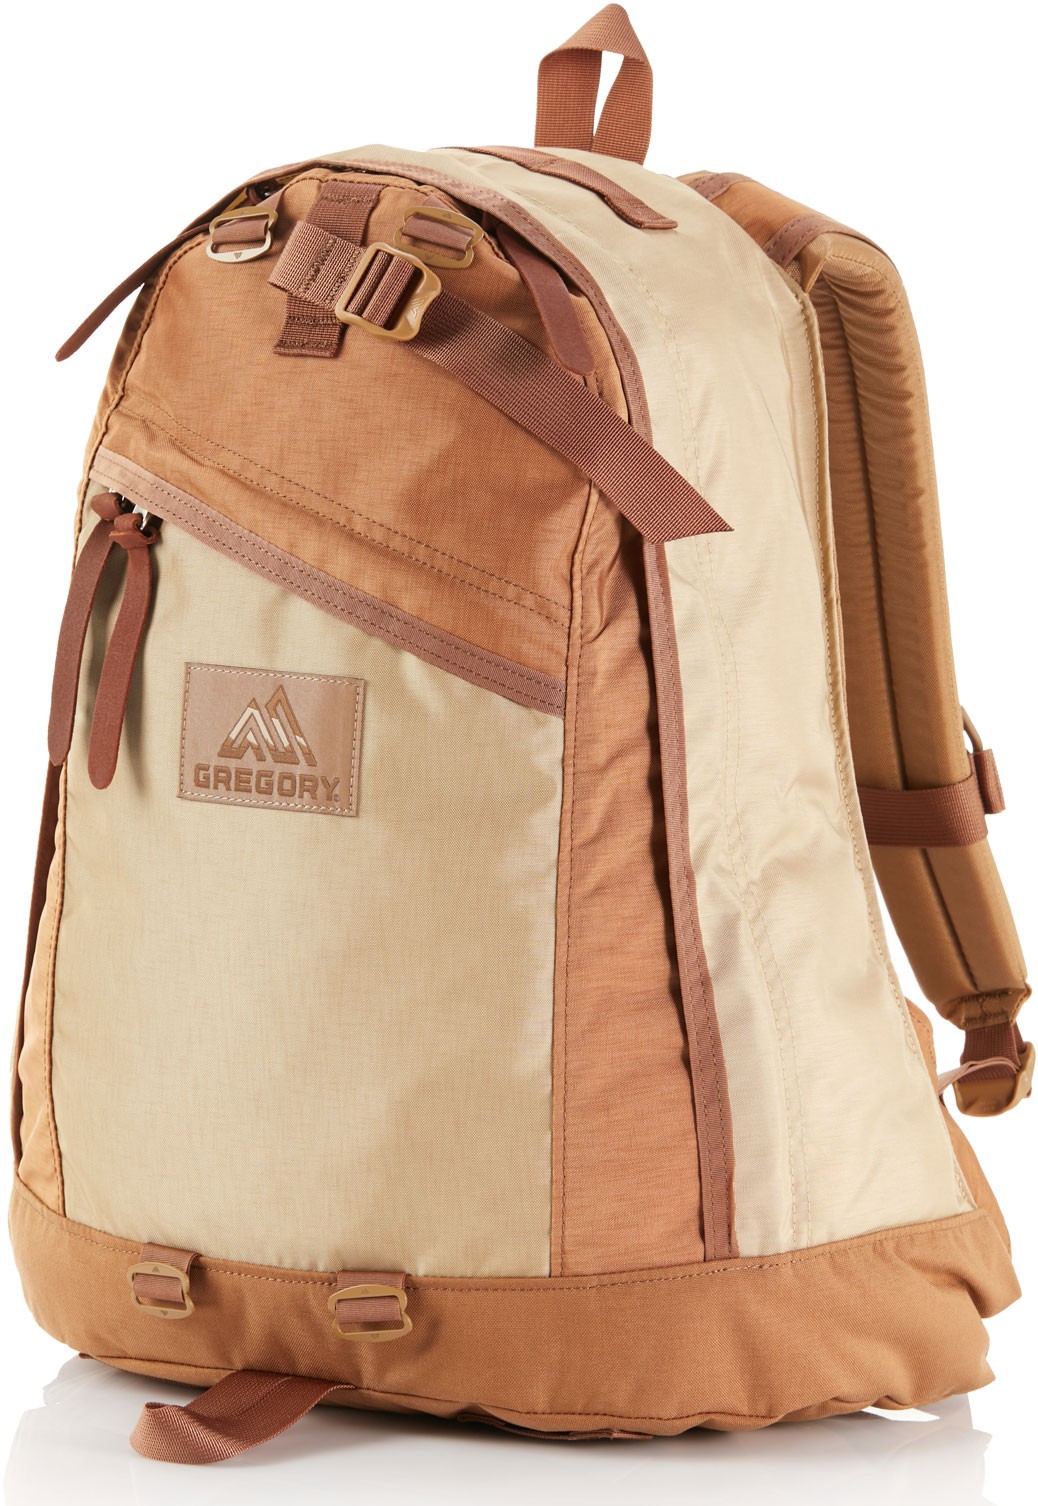 Gregory Classic Backpack - Day 香港行貨 Earth Brown 26L 背囊 